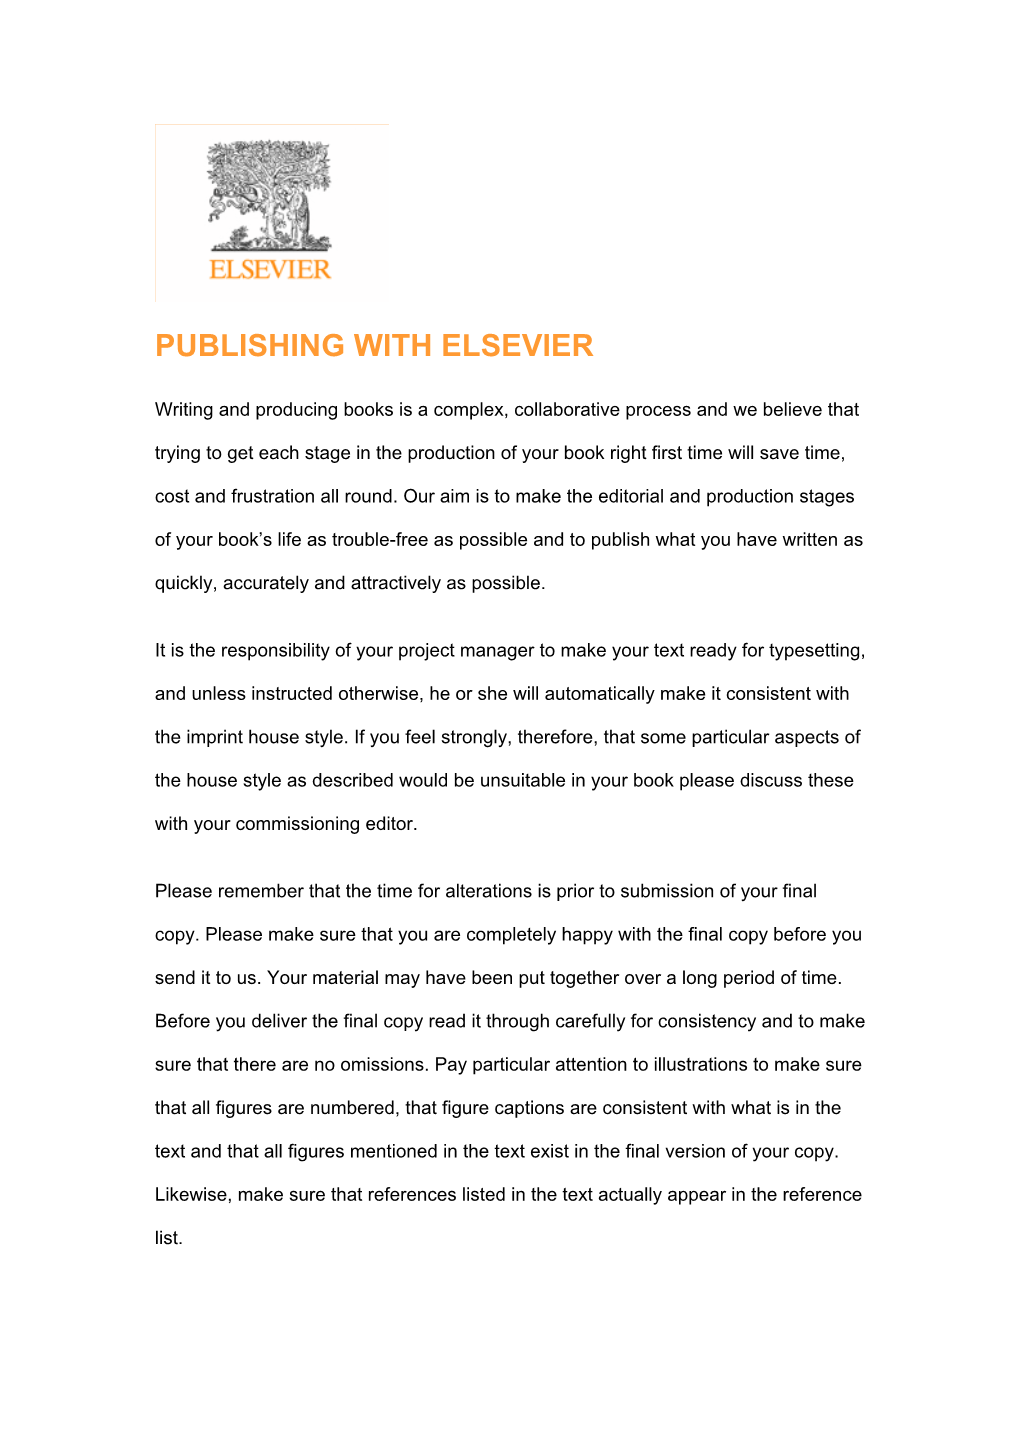 Publishing with Elsevier